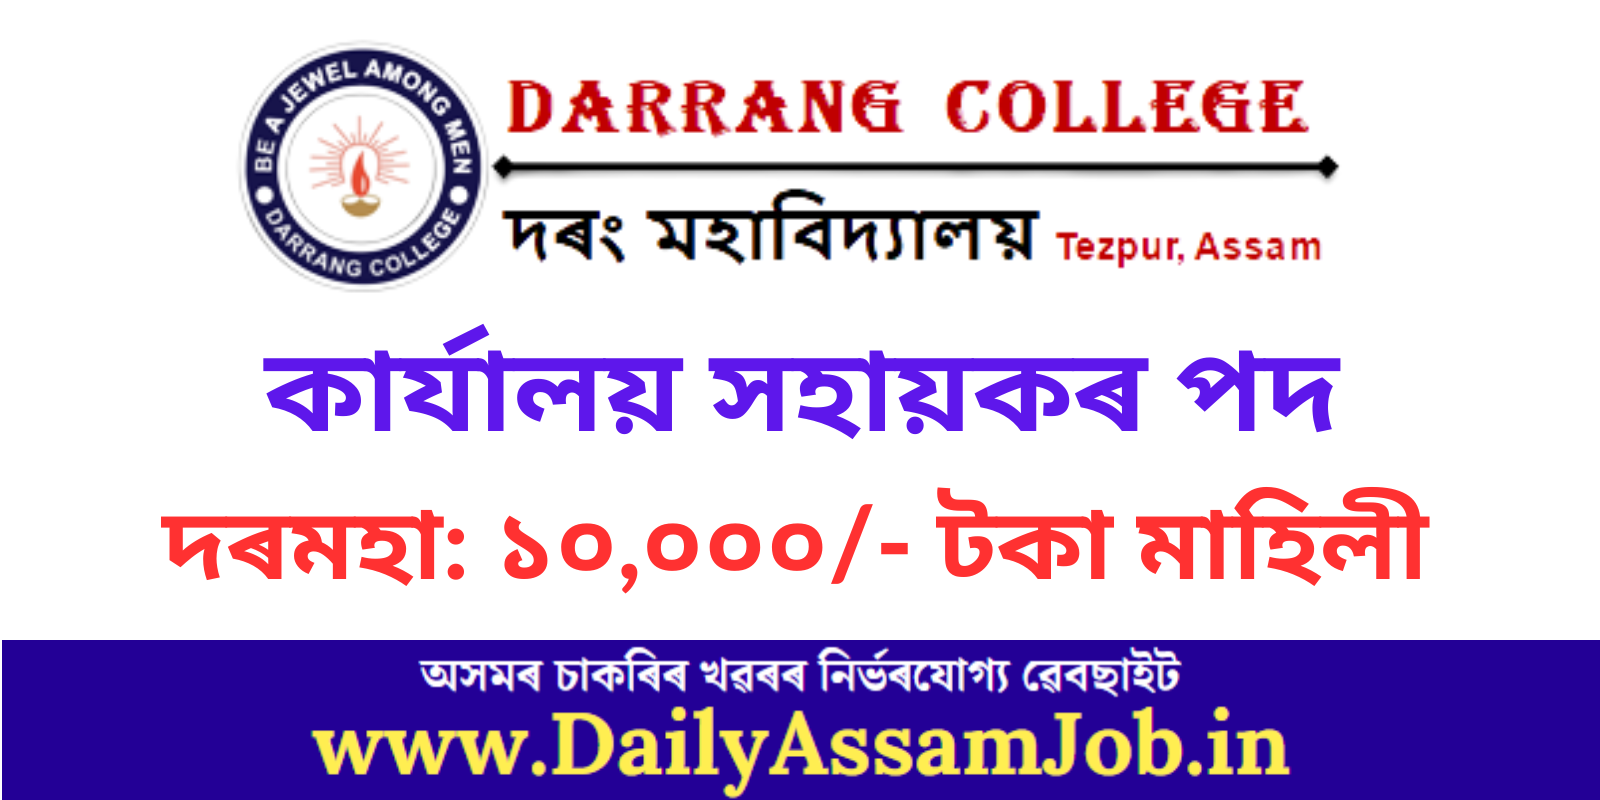 Apply for Office Assistant Vacancy in Darrang College